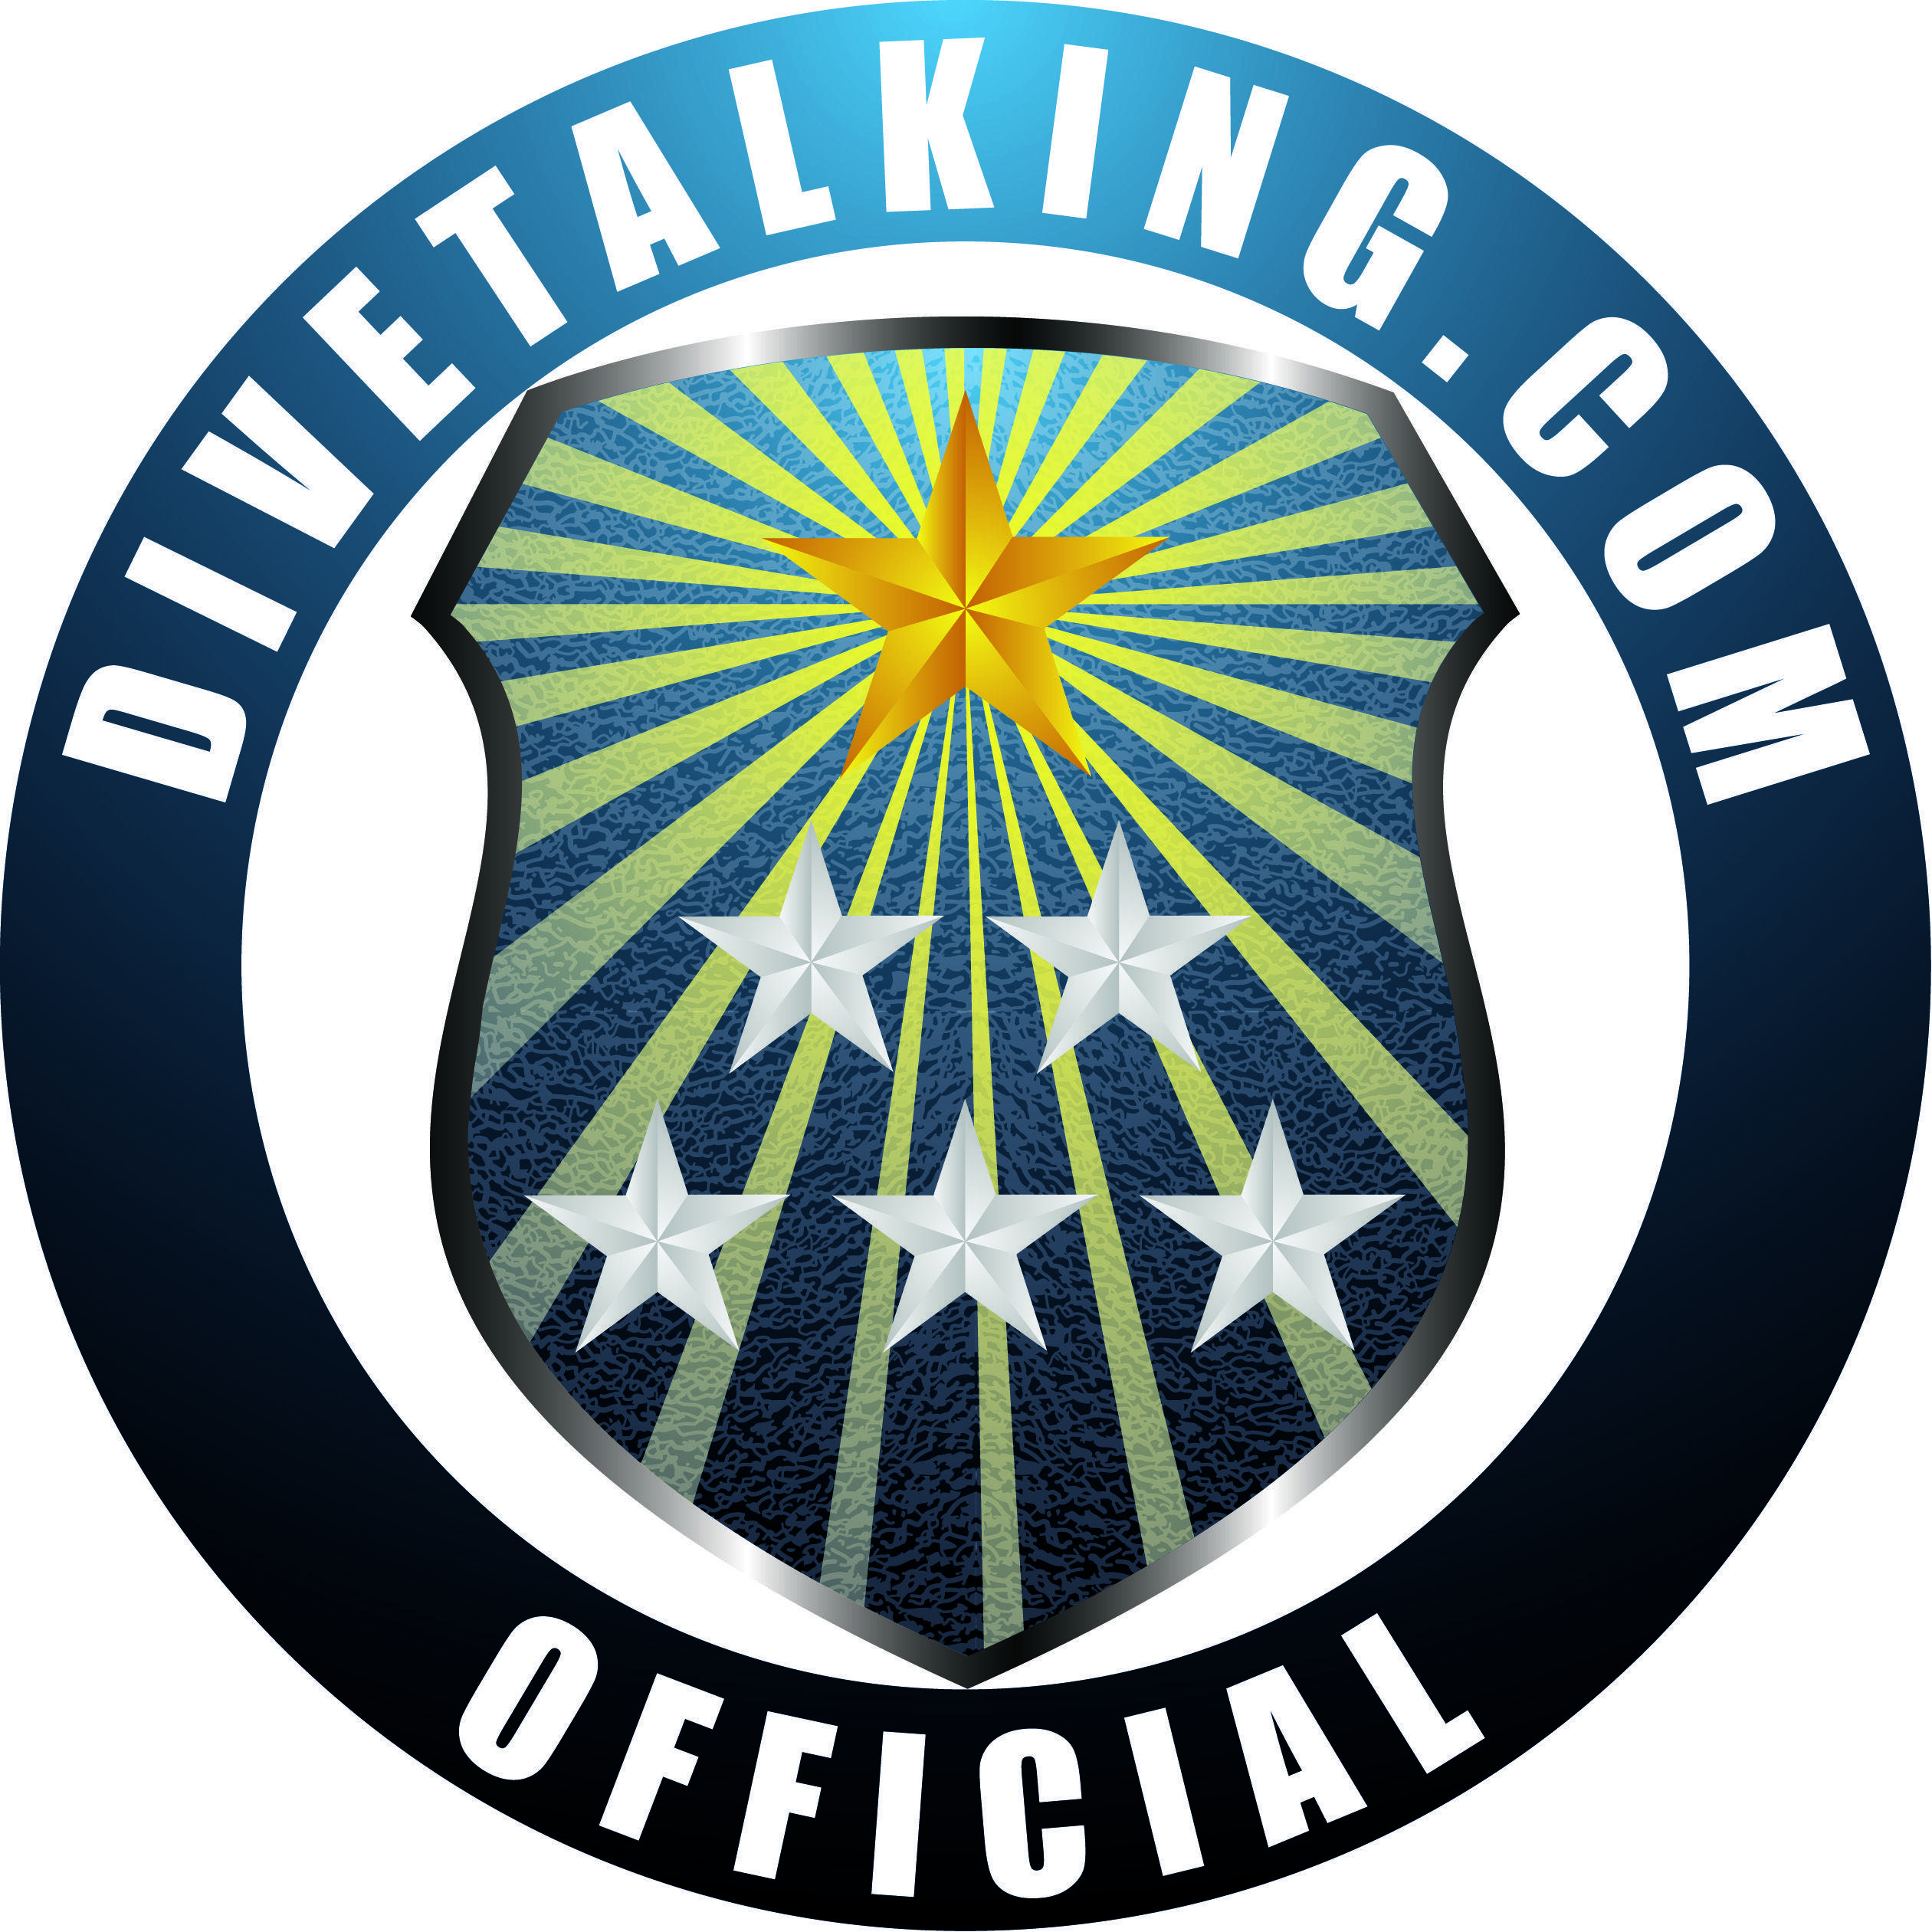 Official Logo - Show your support by displaying Divetalkings official logo | Divetalking